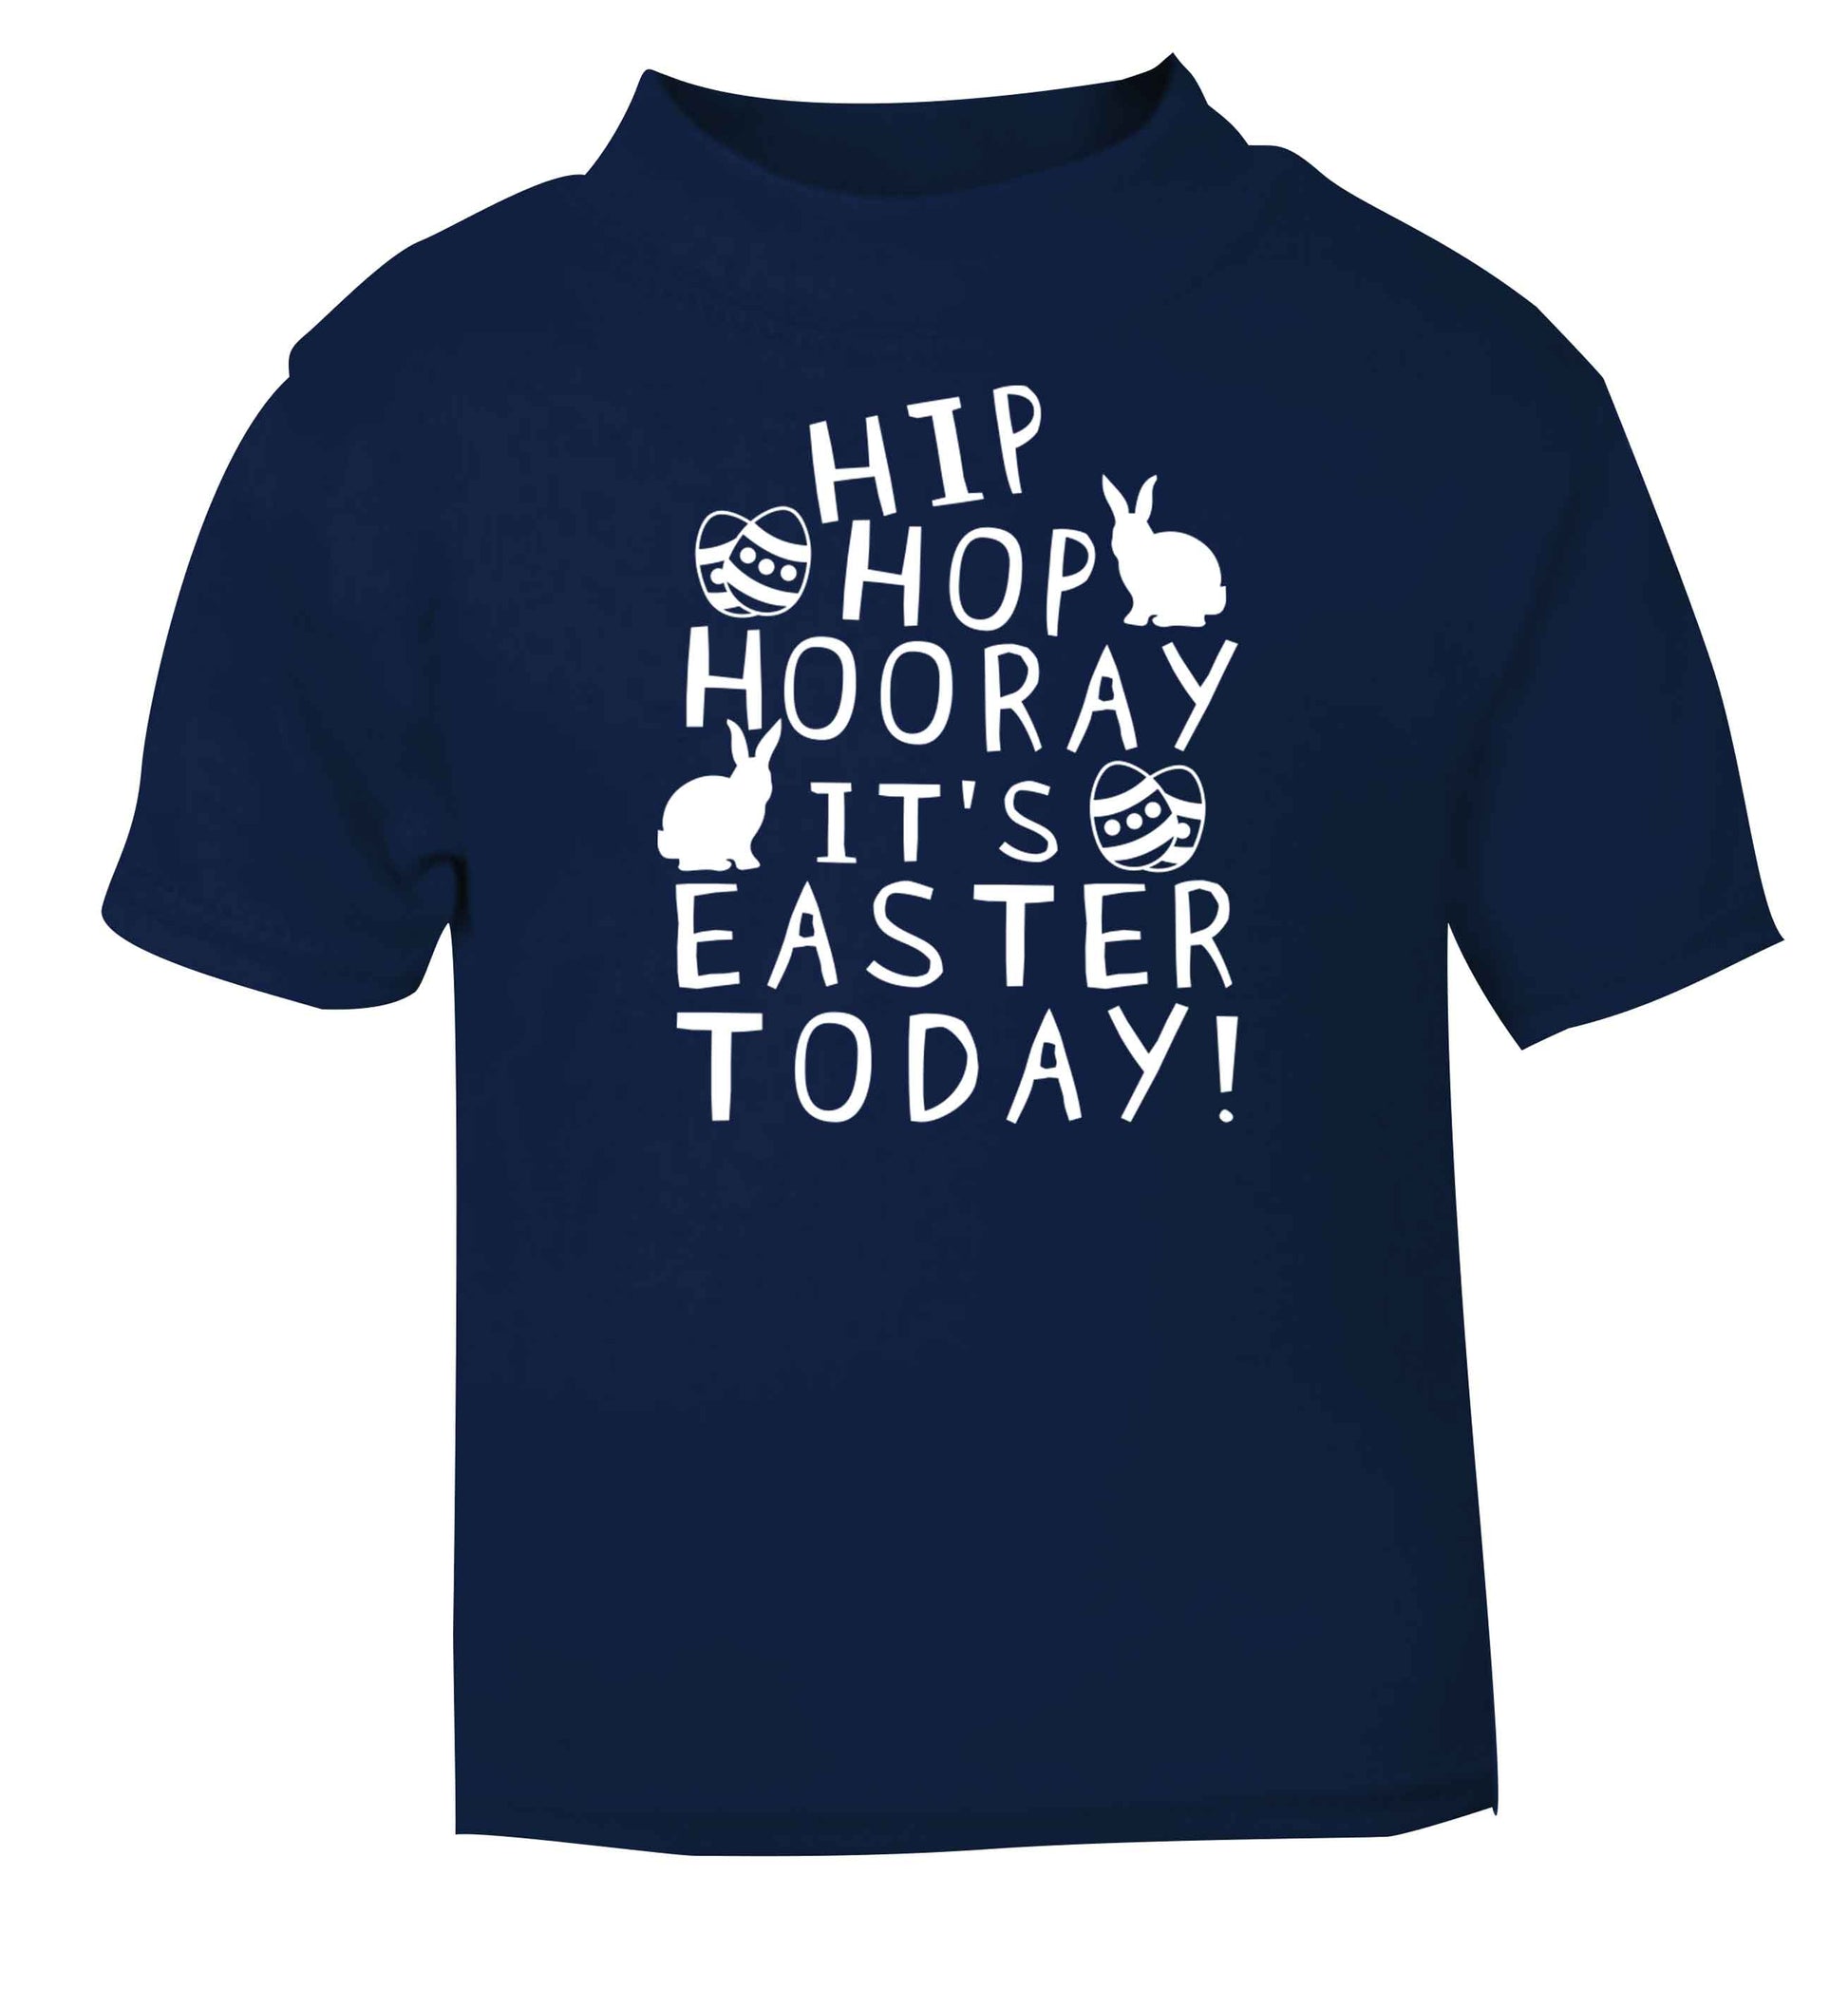 Hip hip hooray it's Easter today! navy baby toddler Tshirt 2 Years